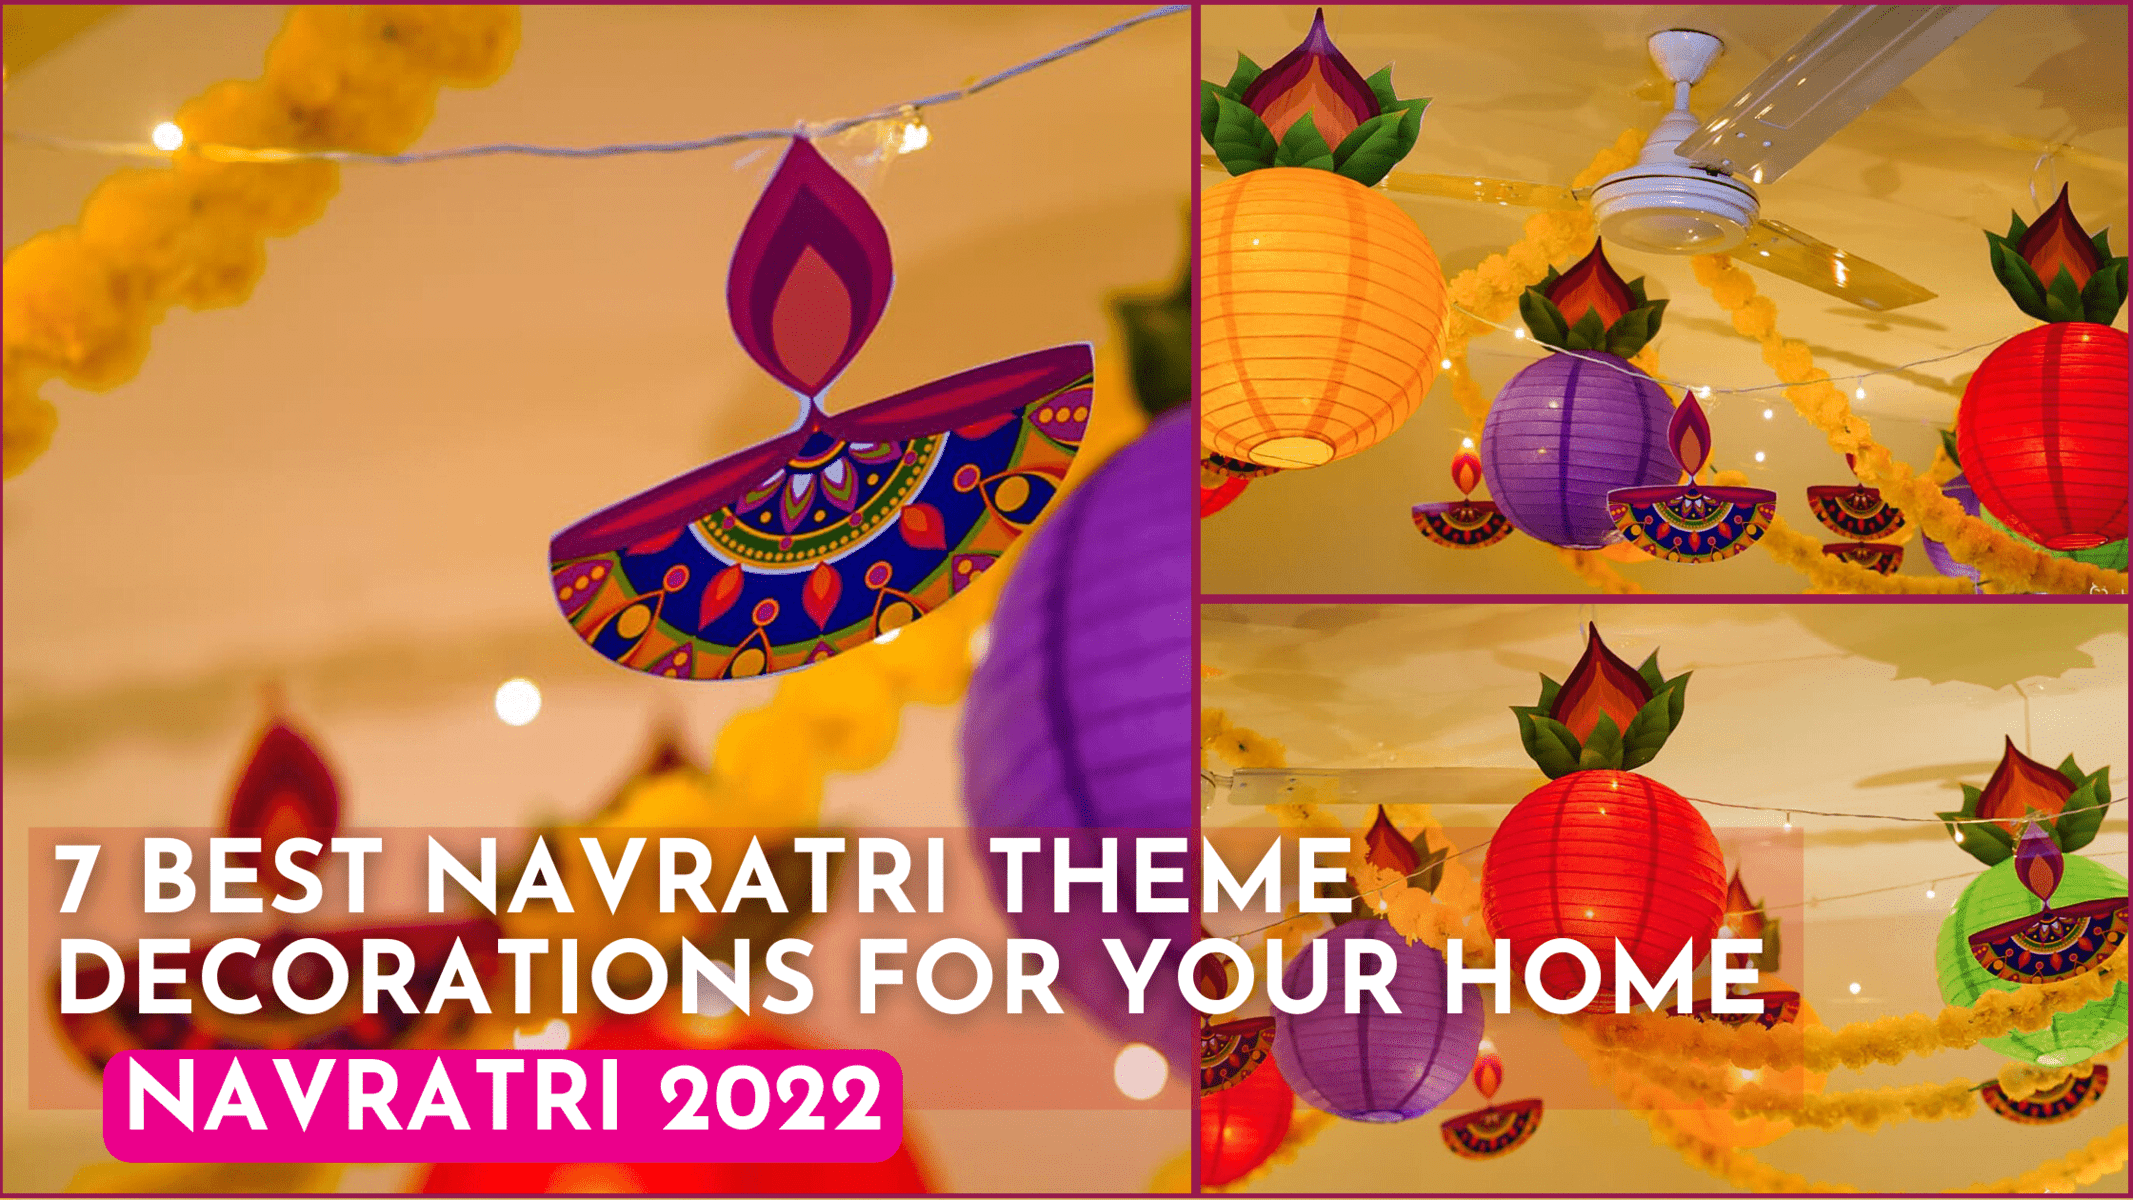 Protected: 7 Best Navratri Theme Decorations for your Home (with Pictures): Navratri 2022